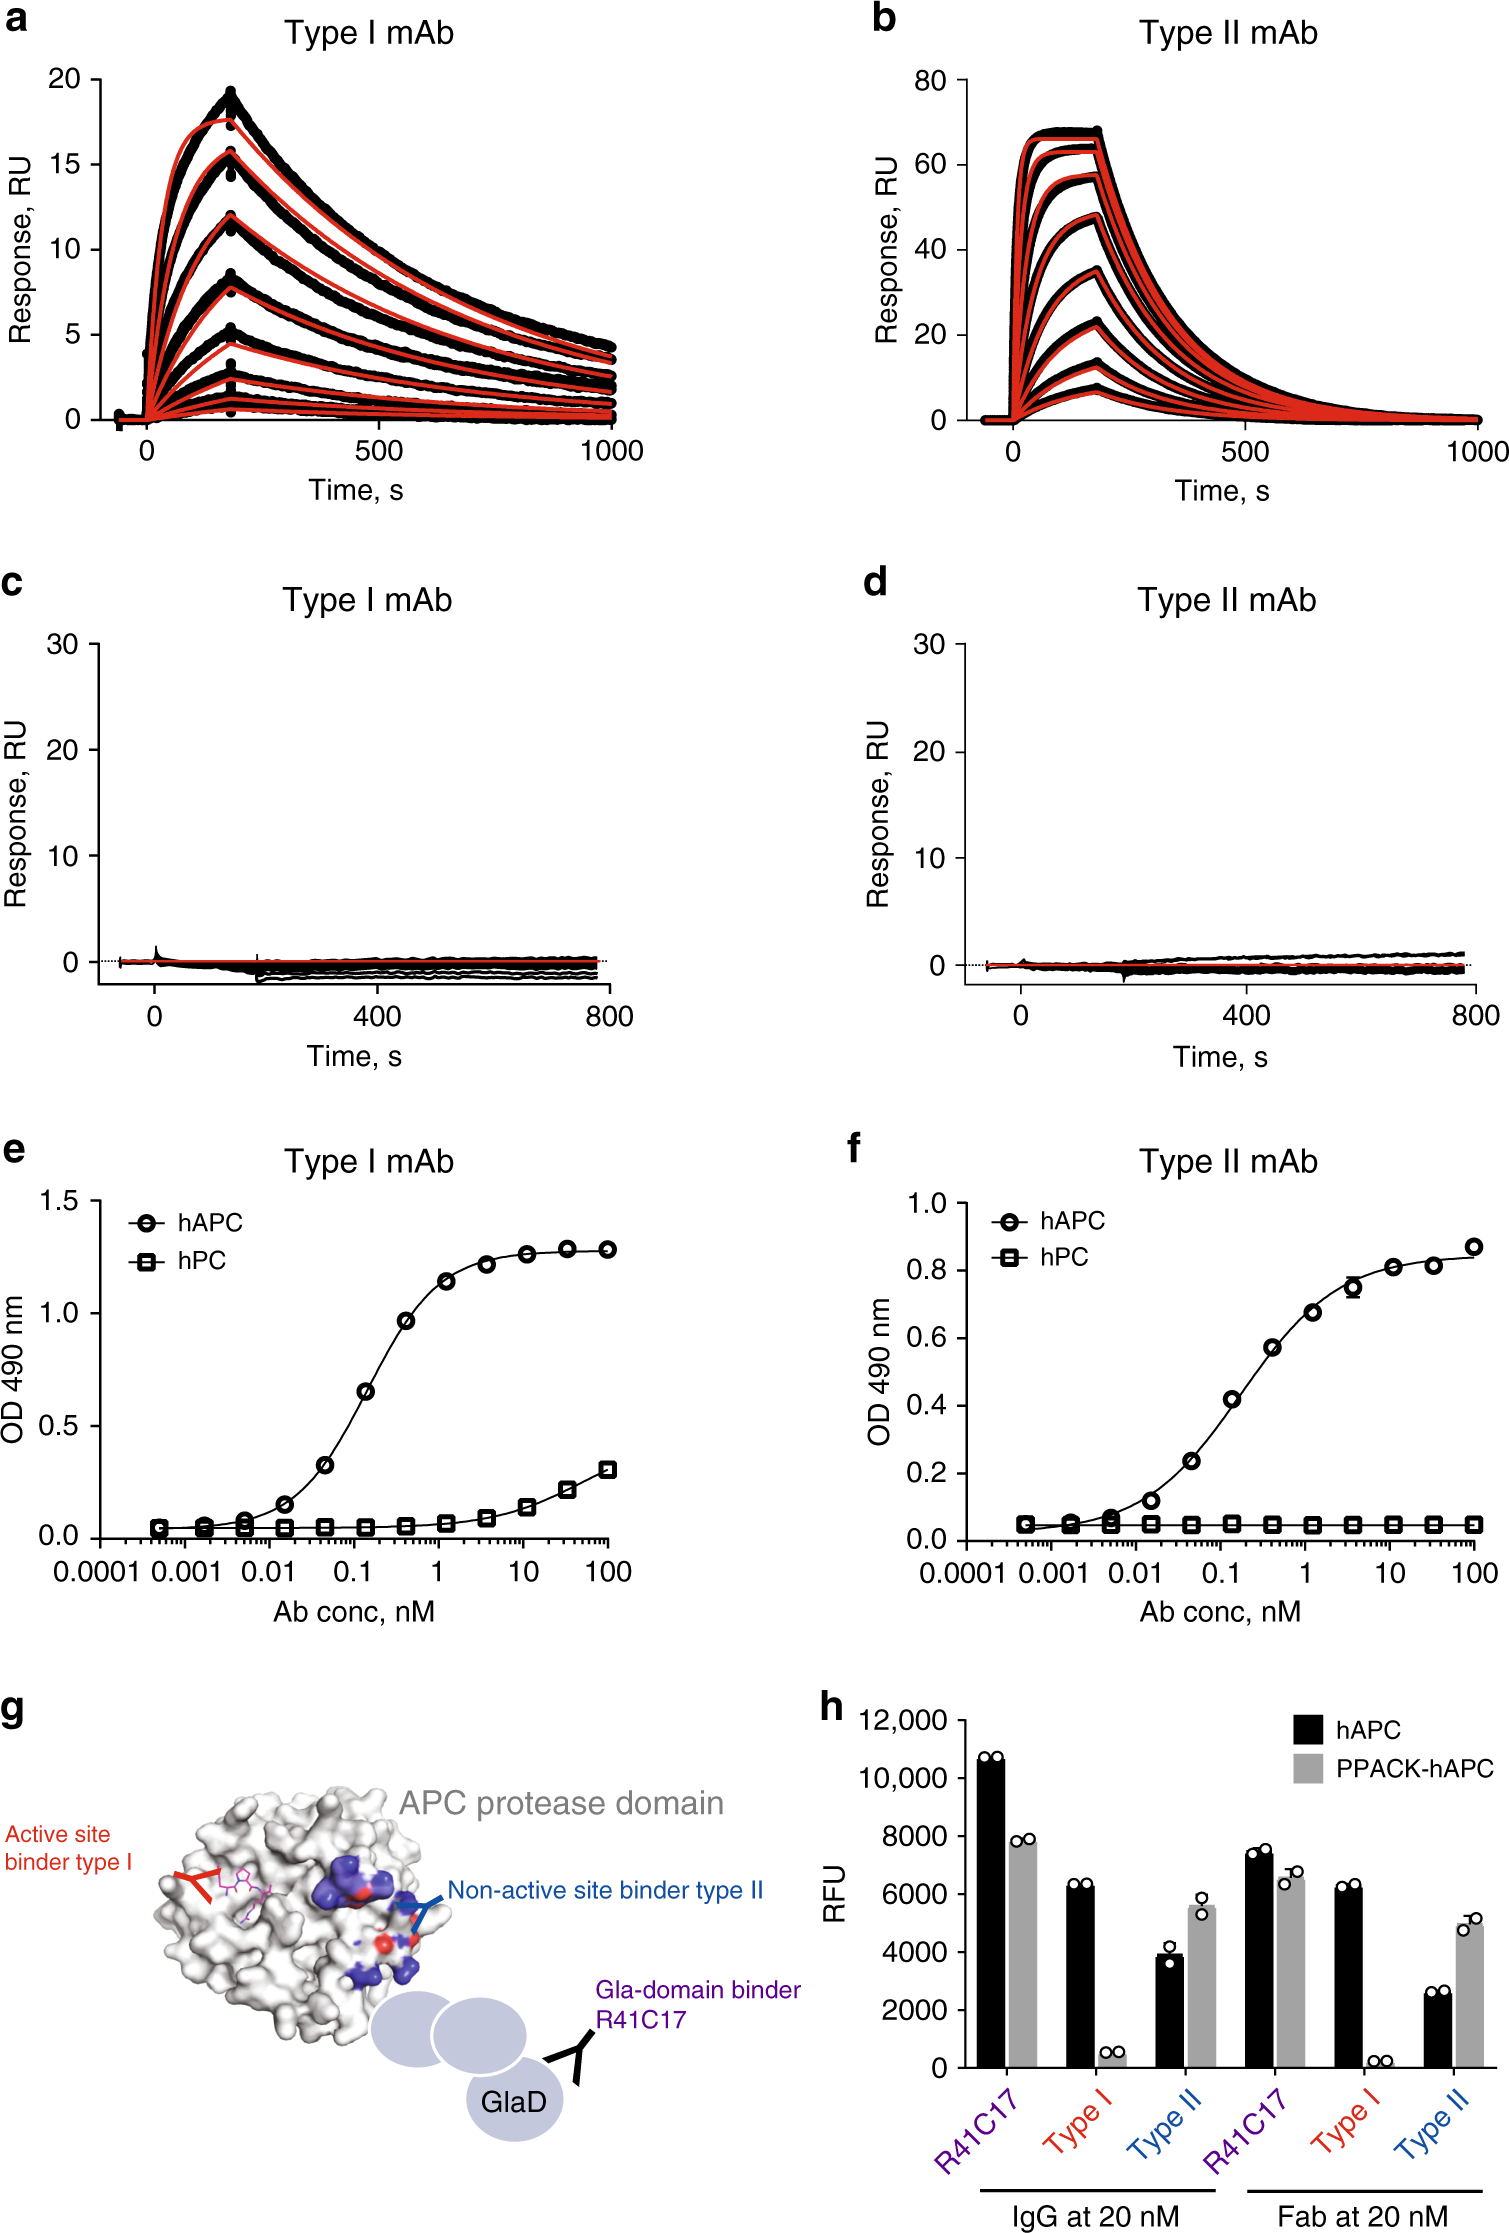 Targeted inhibition of activated protein C by a non-active-site inhibitory  antibody to treat hemophilia | Nature Communications